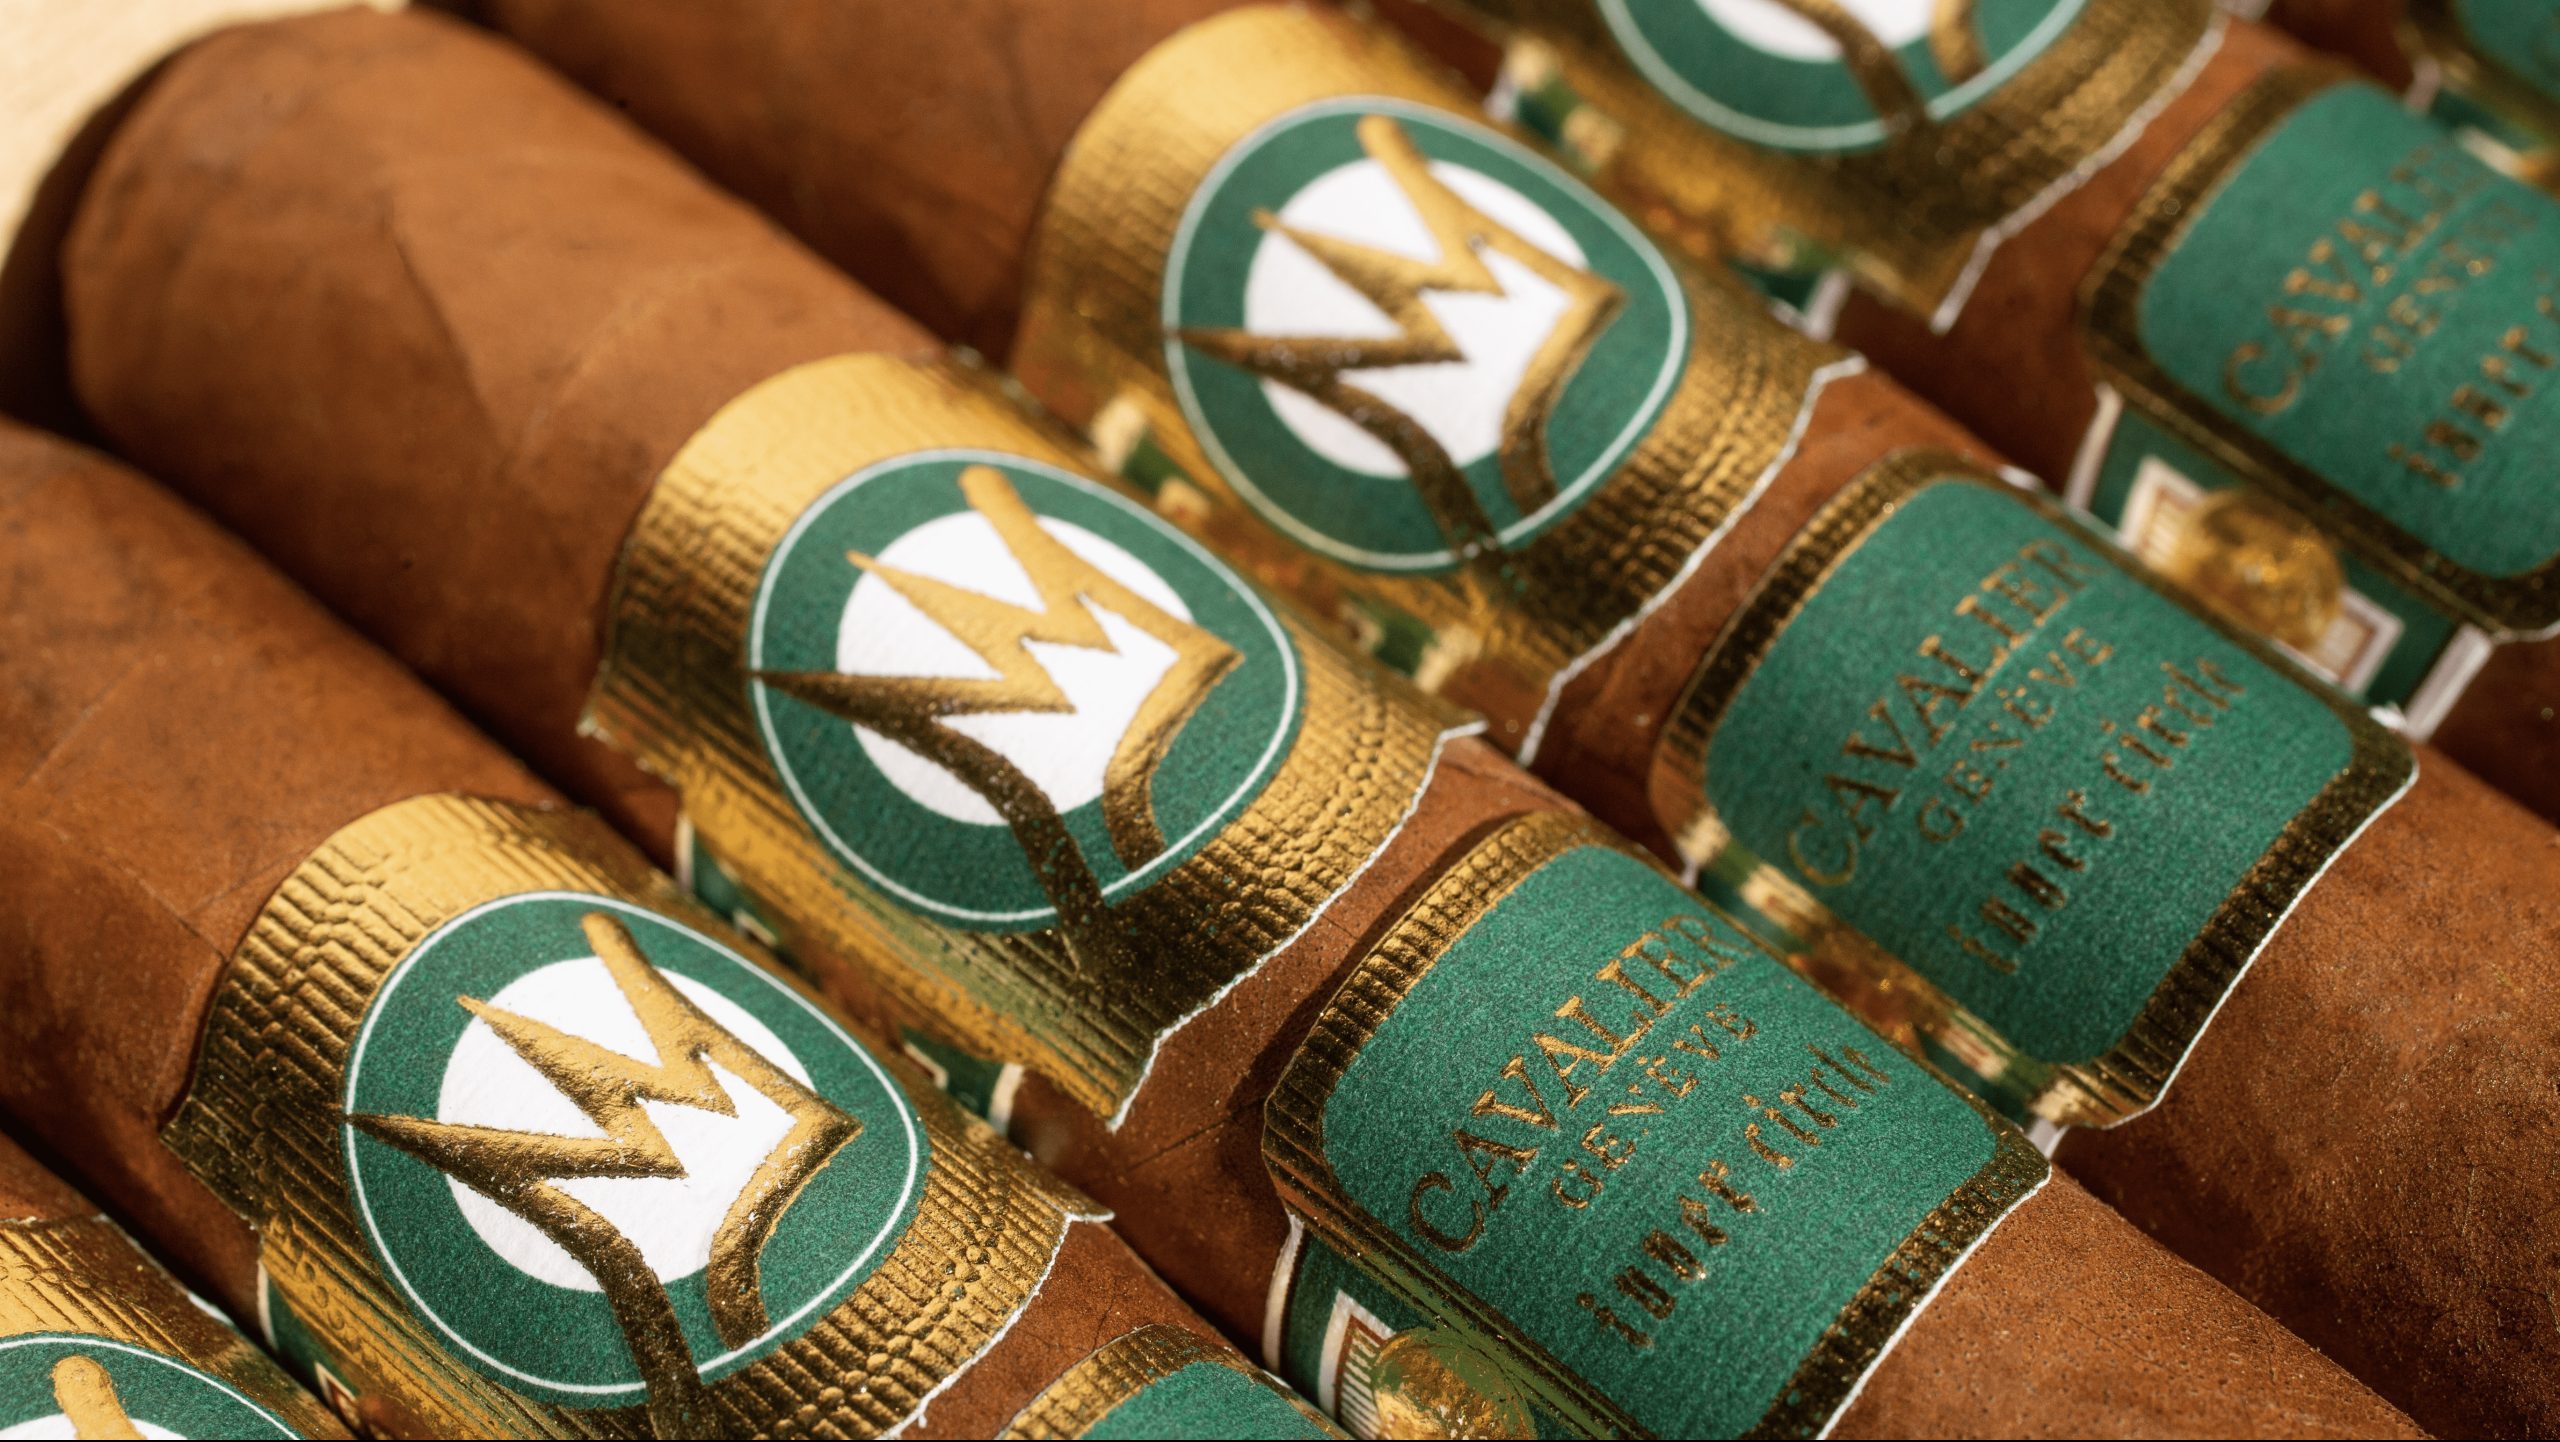 Cavalier Genève Cigars Releases “The Green Jacket”: New Annual Project for the Vault Honoring the Masters